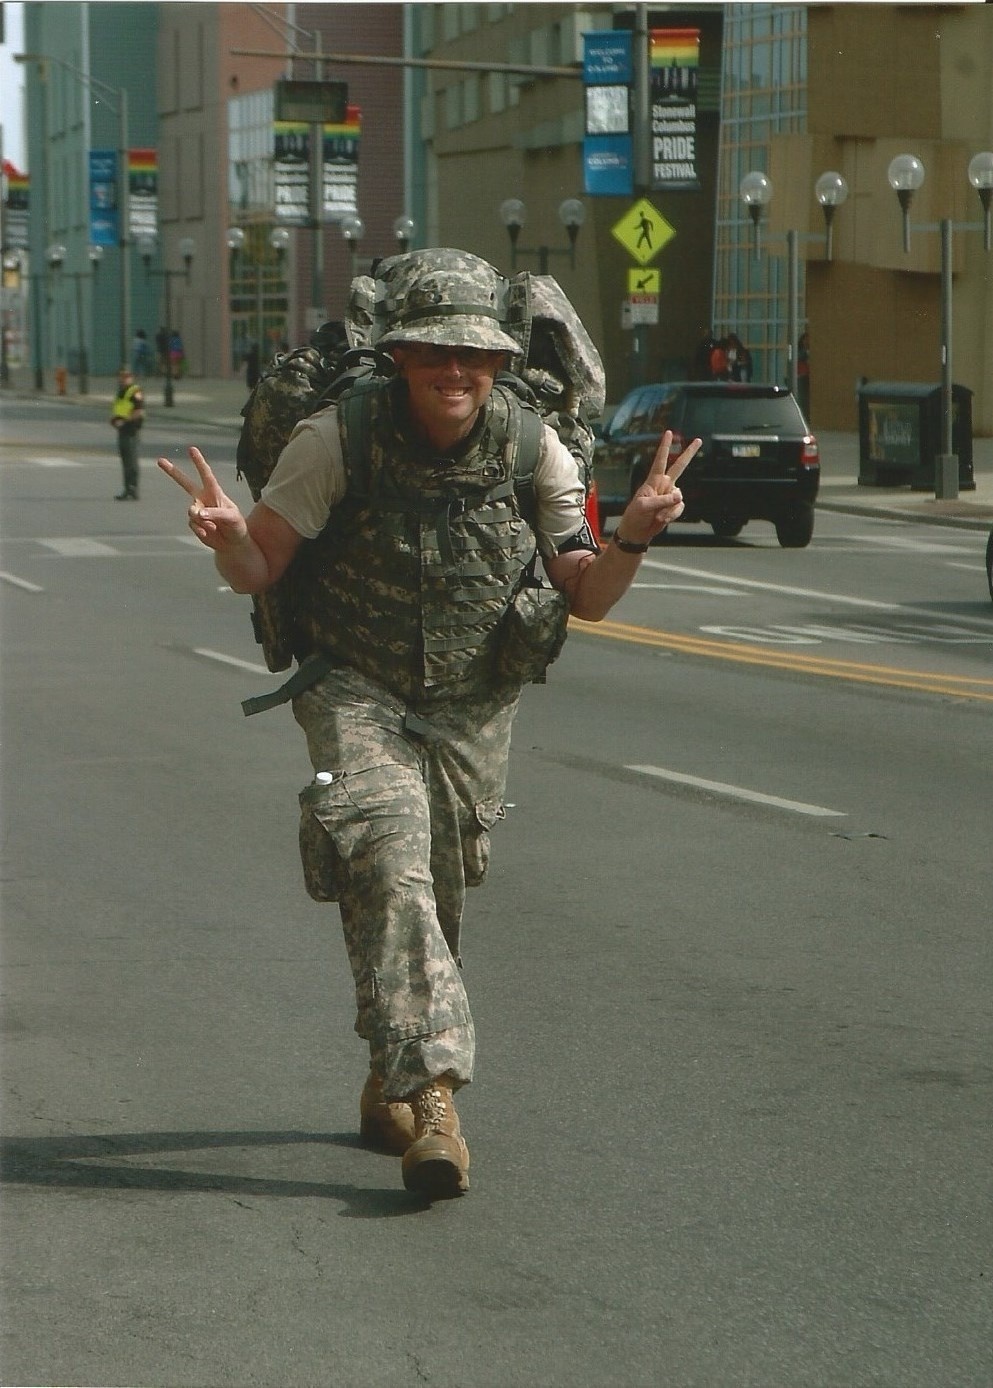 One soldier’s marathon quest for fitness